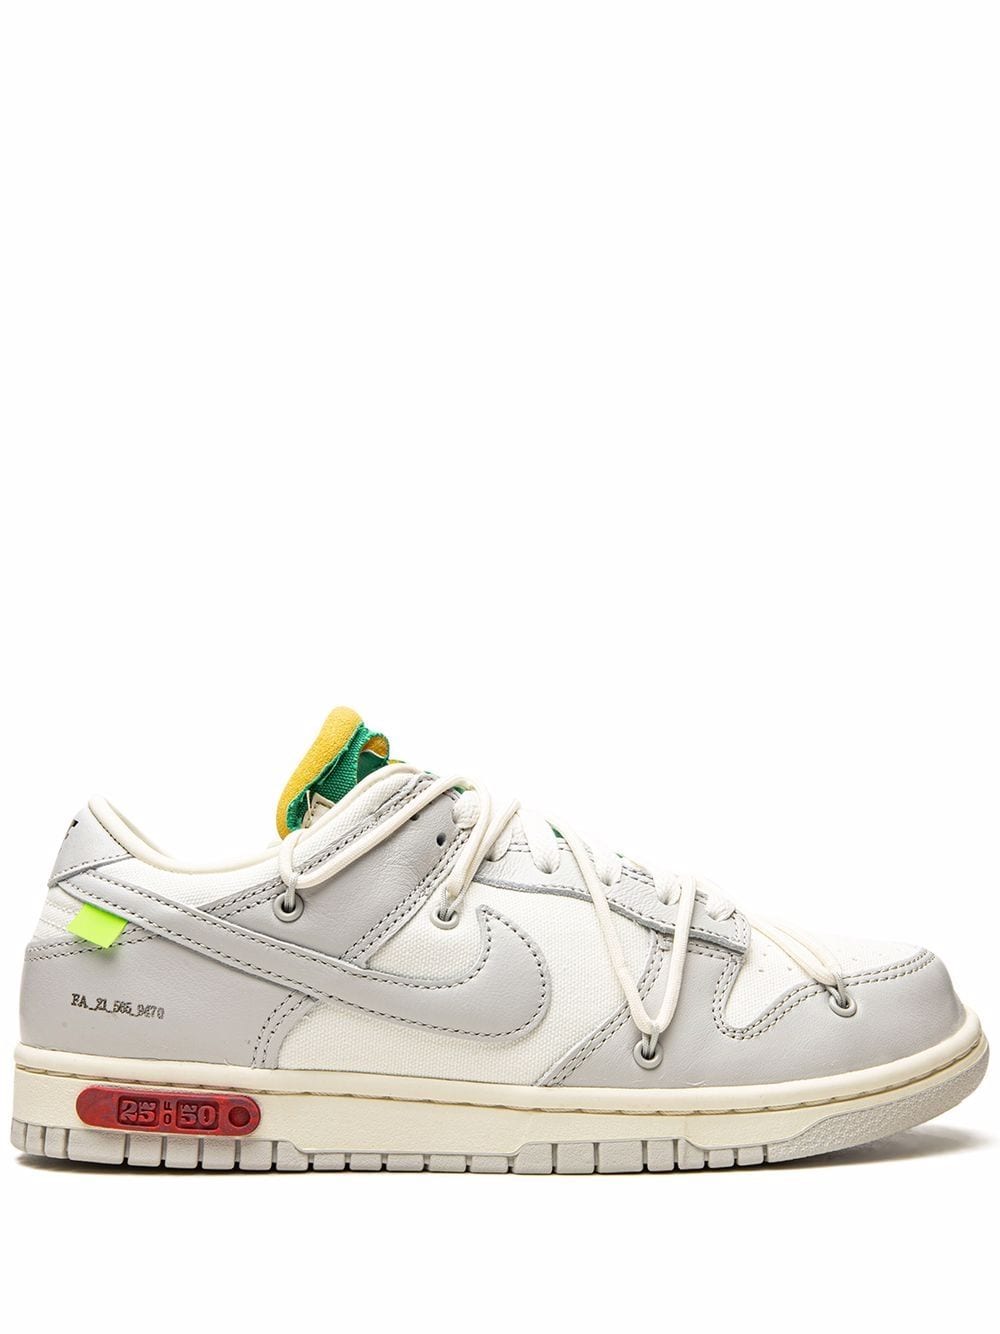 Nike X Off-White x Off-White Dunk Low sneakers - Grijs